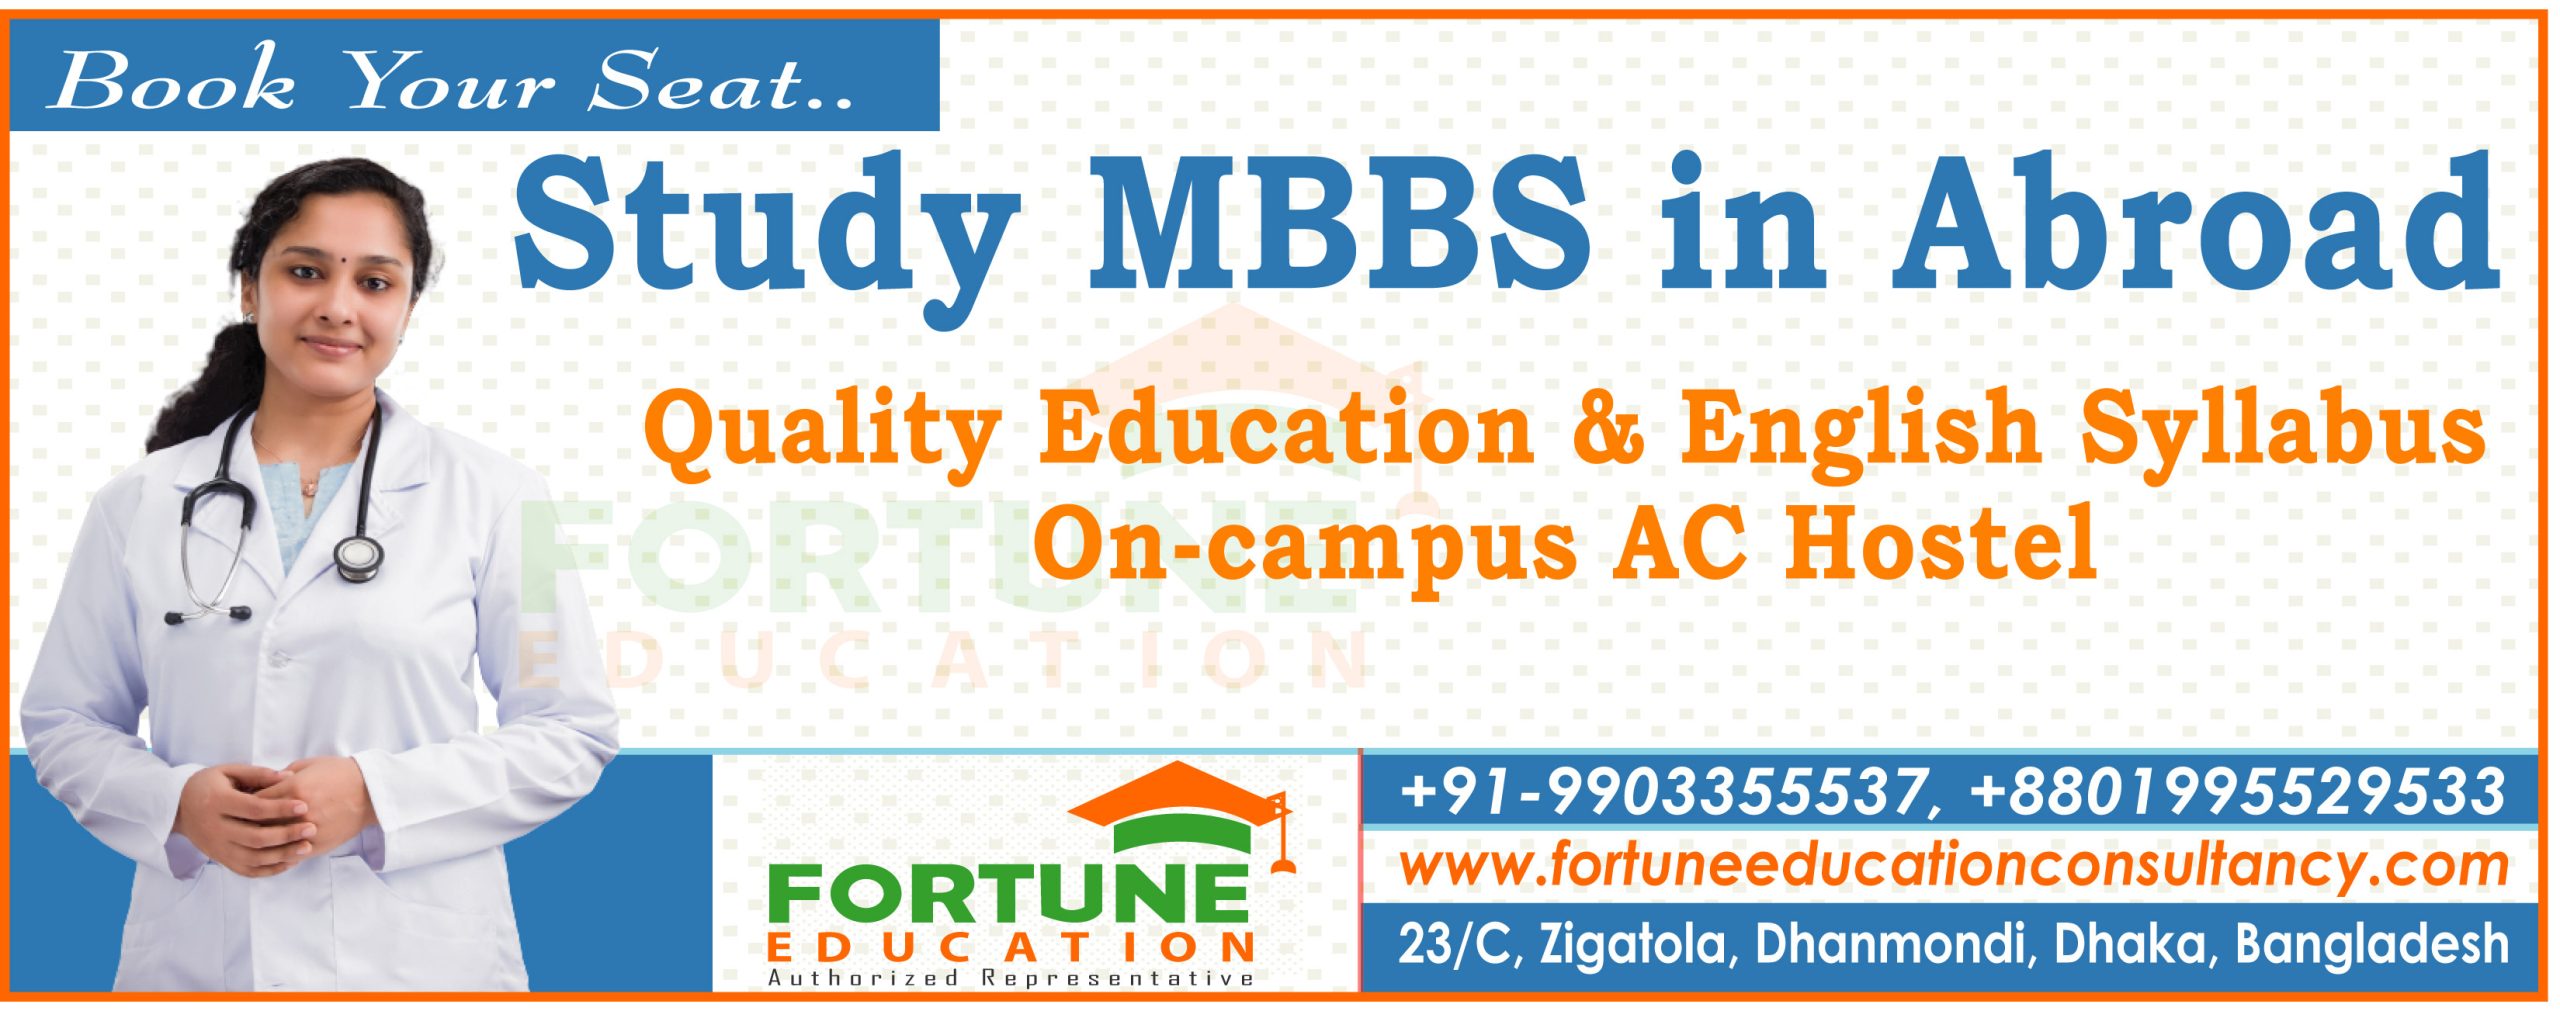 MBBS Study in International Medical College